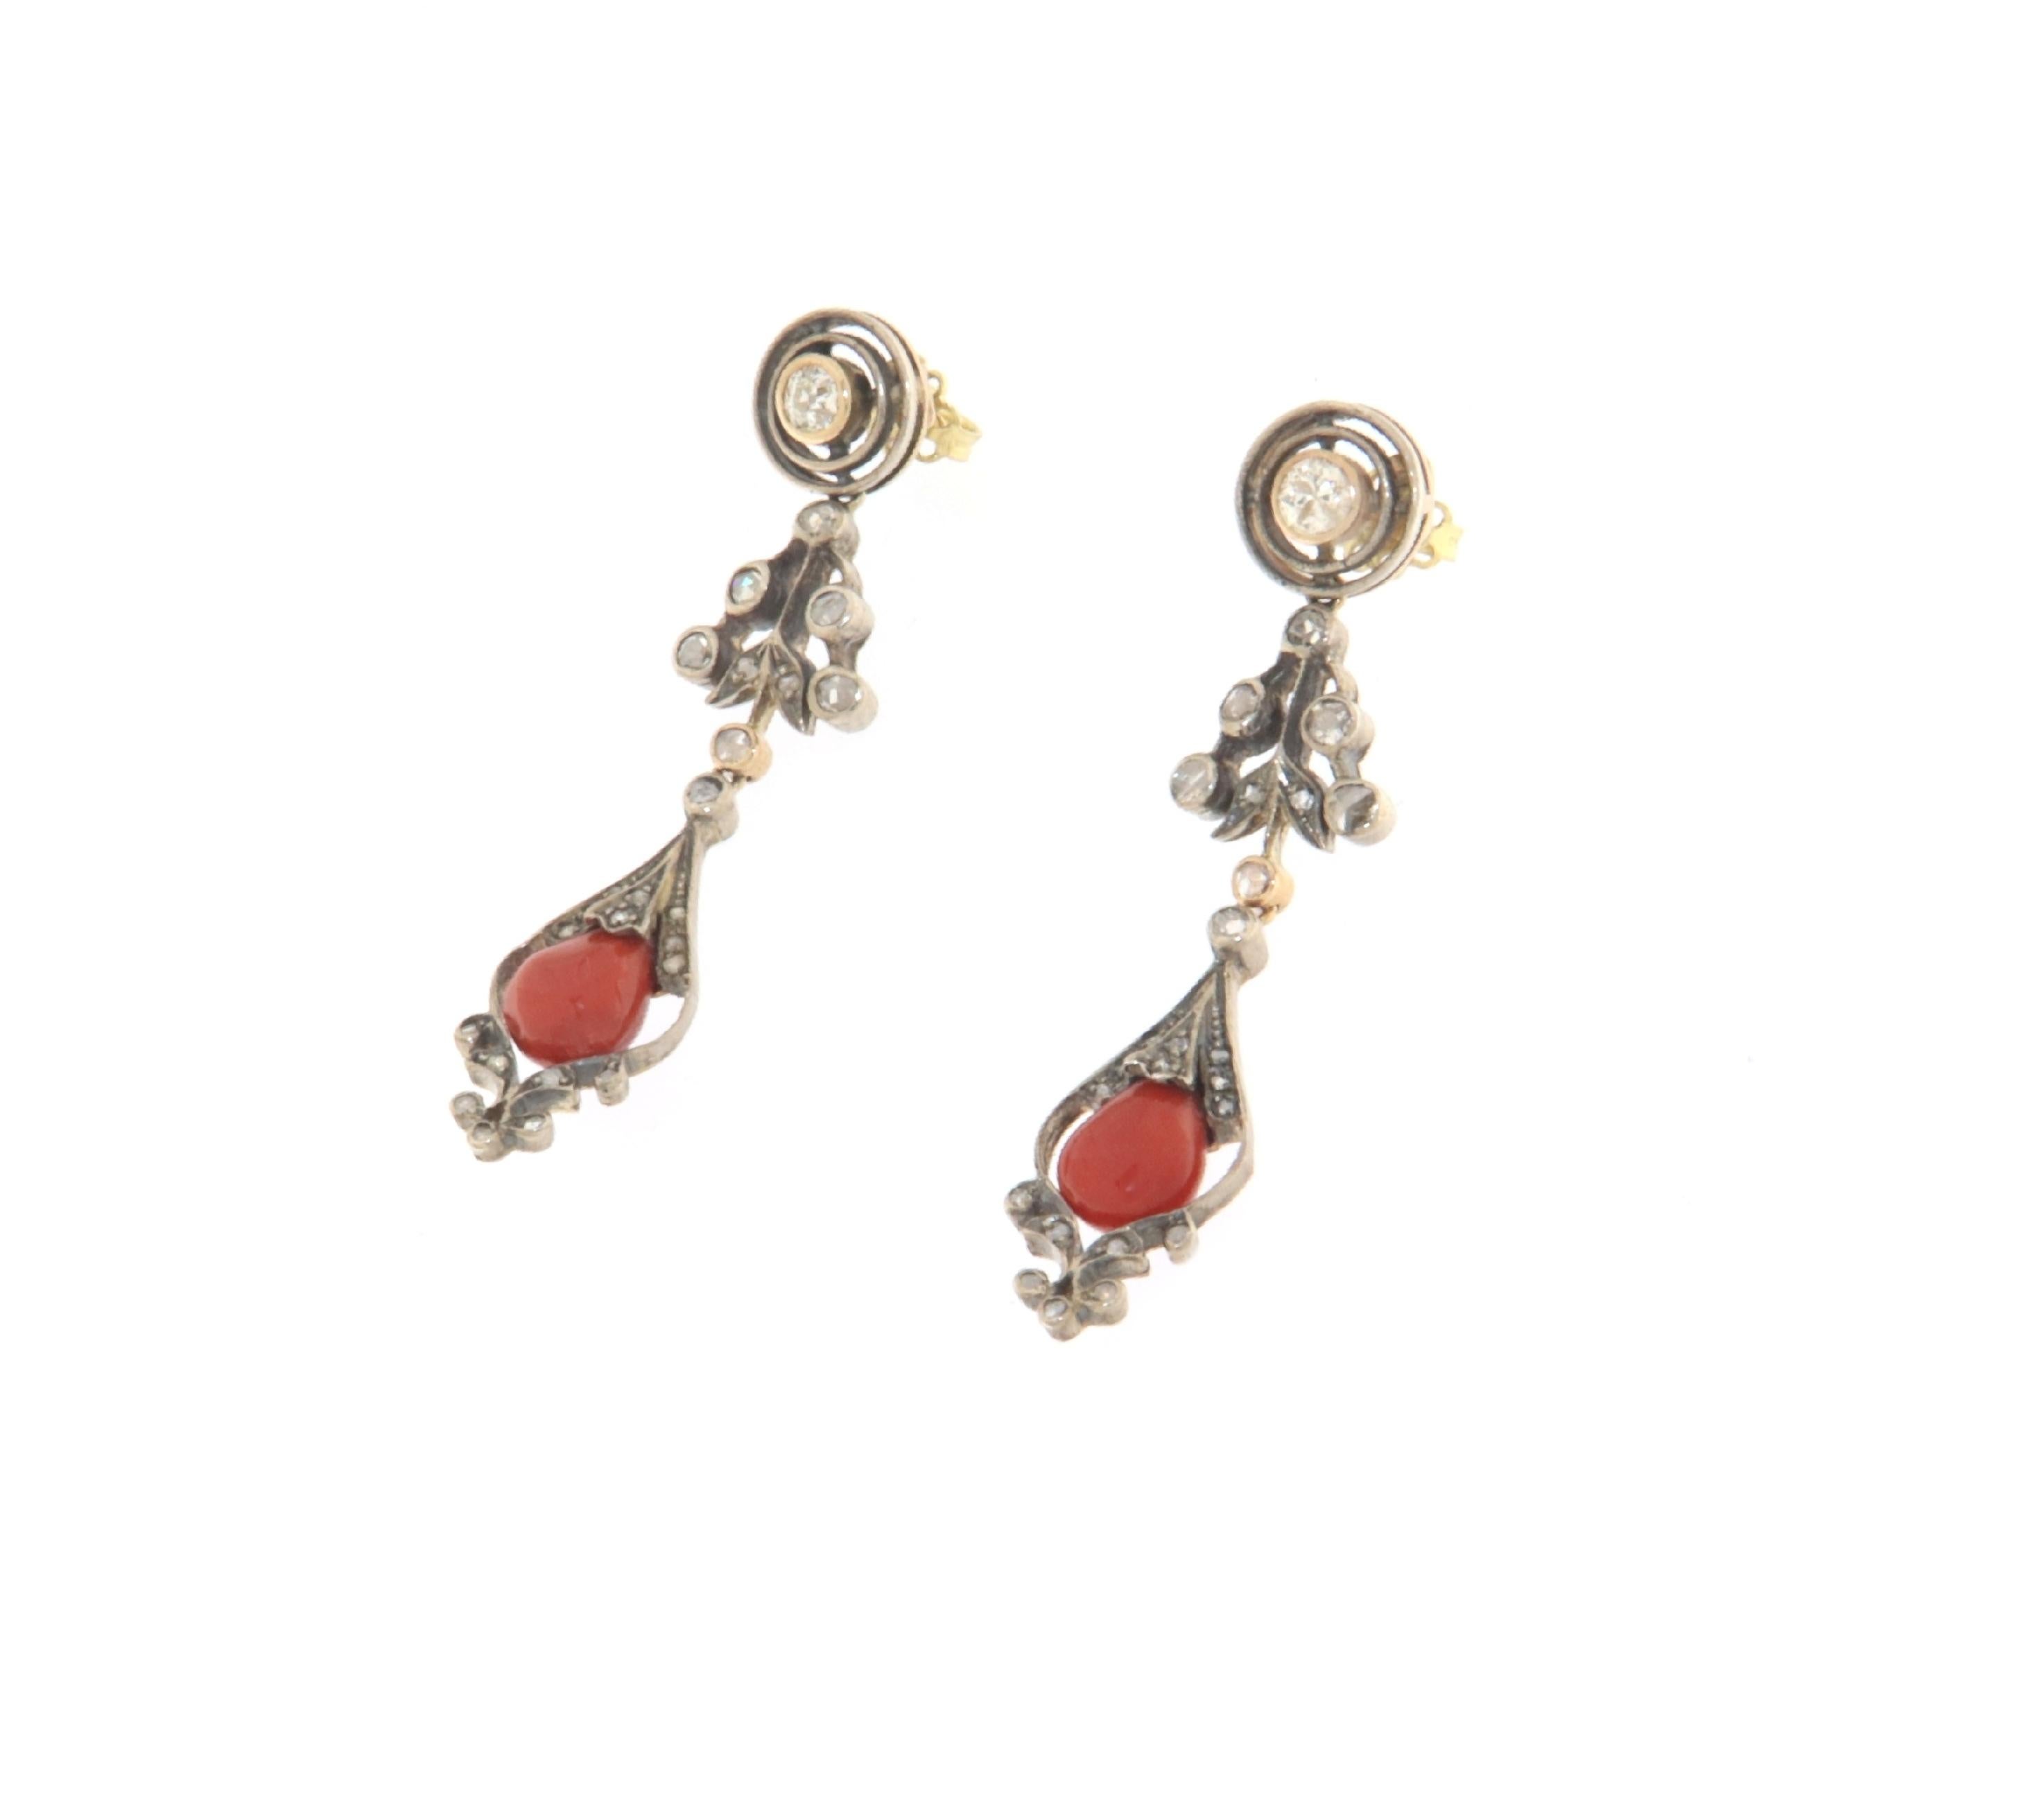 These earrings are an exquisite expression of elegance and sophistication, combining the timeless allure of Sardinian coral with the brilliance of diamonds, all set in a refined mount of 14-karat gold and 800-millesimal silver.

Each earring